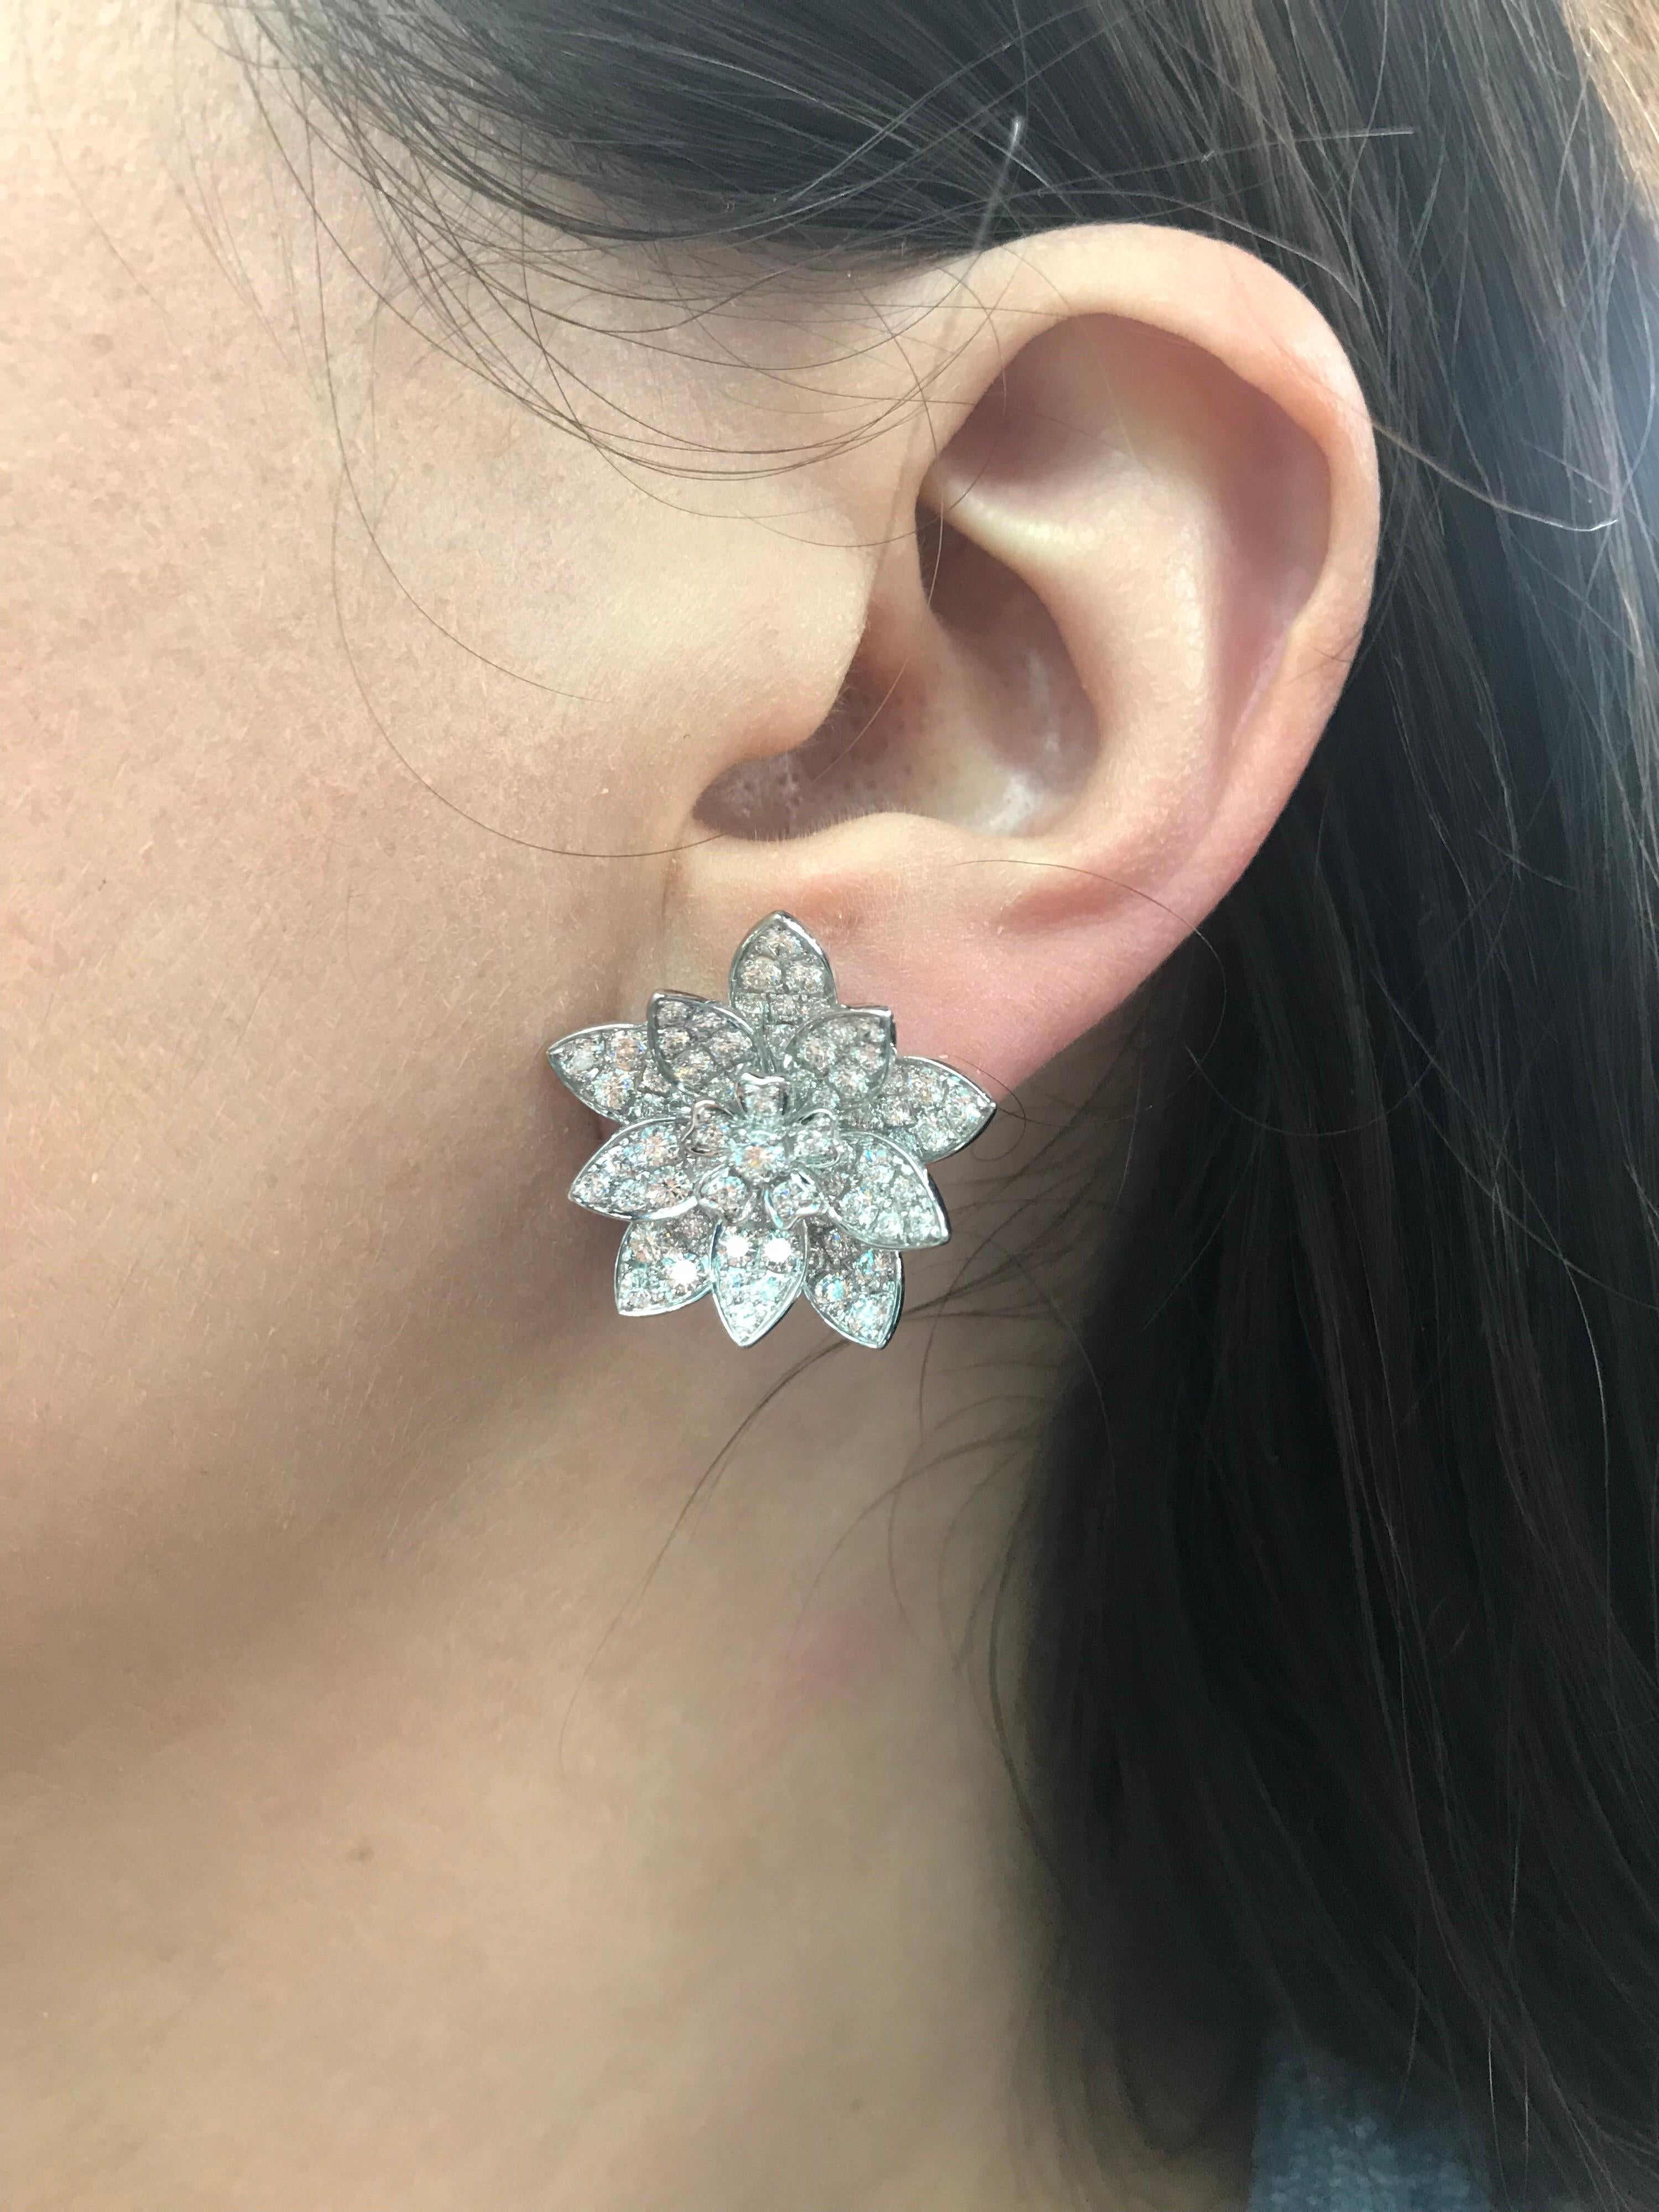 18K White gold floral earrings featuring 152 round brilliants weighing 3.87 carats. Beautiful craftsmanship! 
Color G
Clarity VS-SI